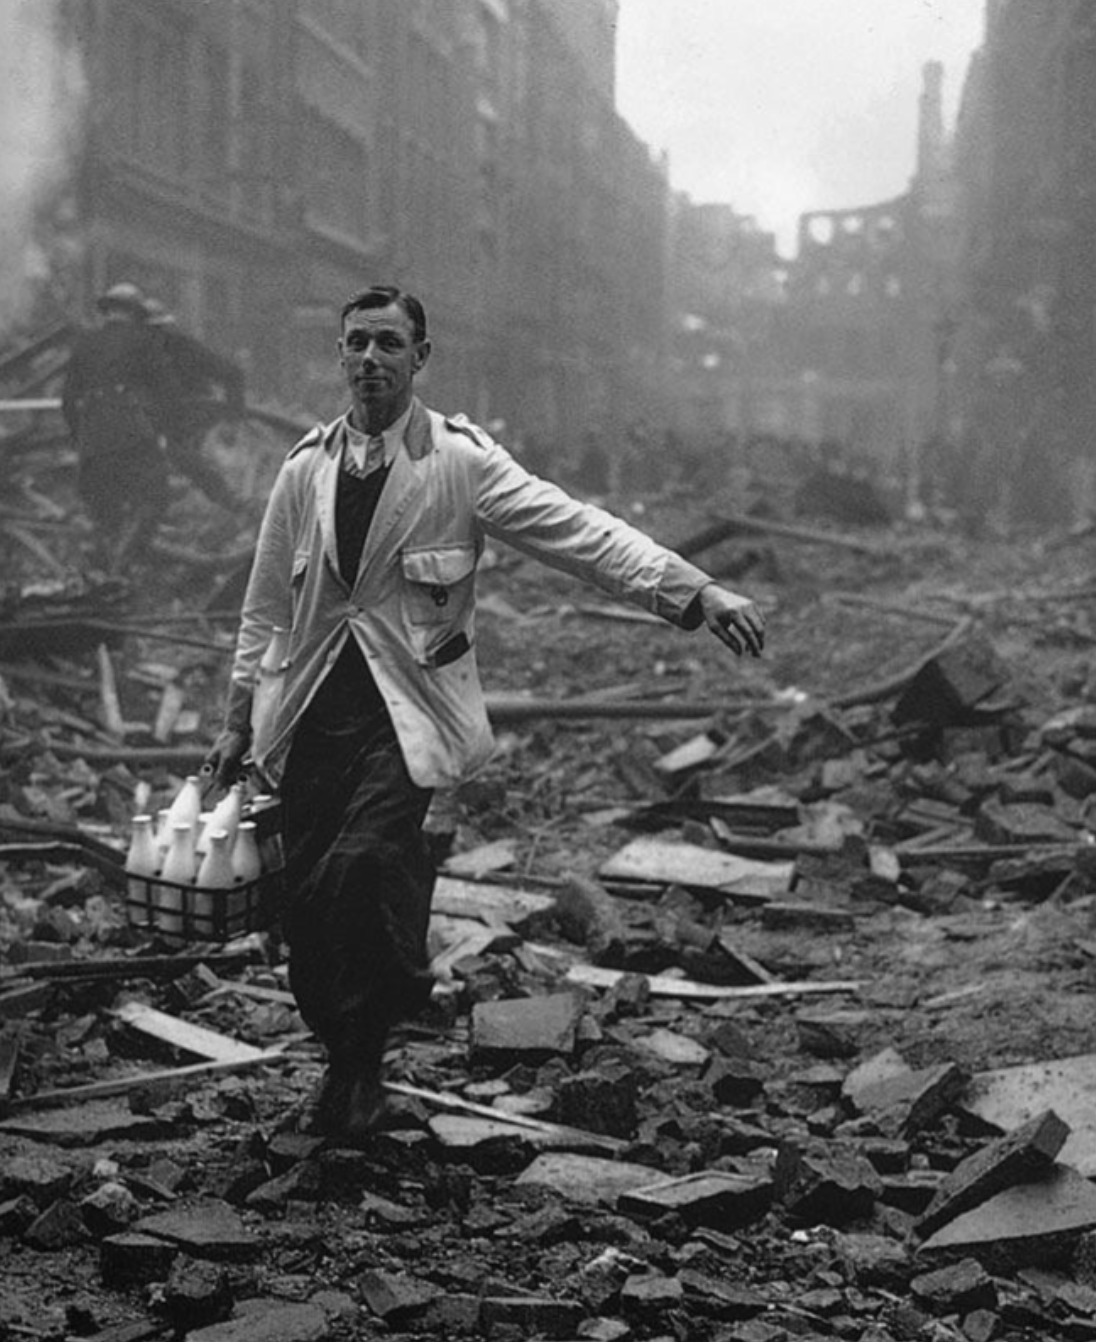 Milk man in bombed out WWII London.